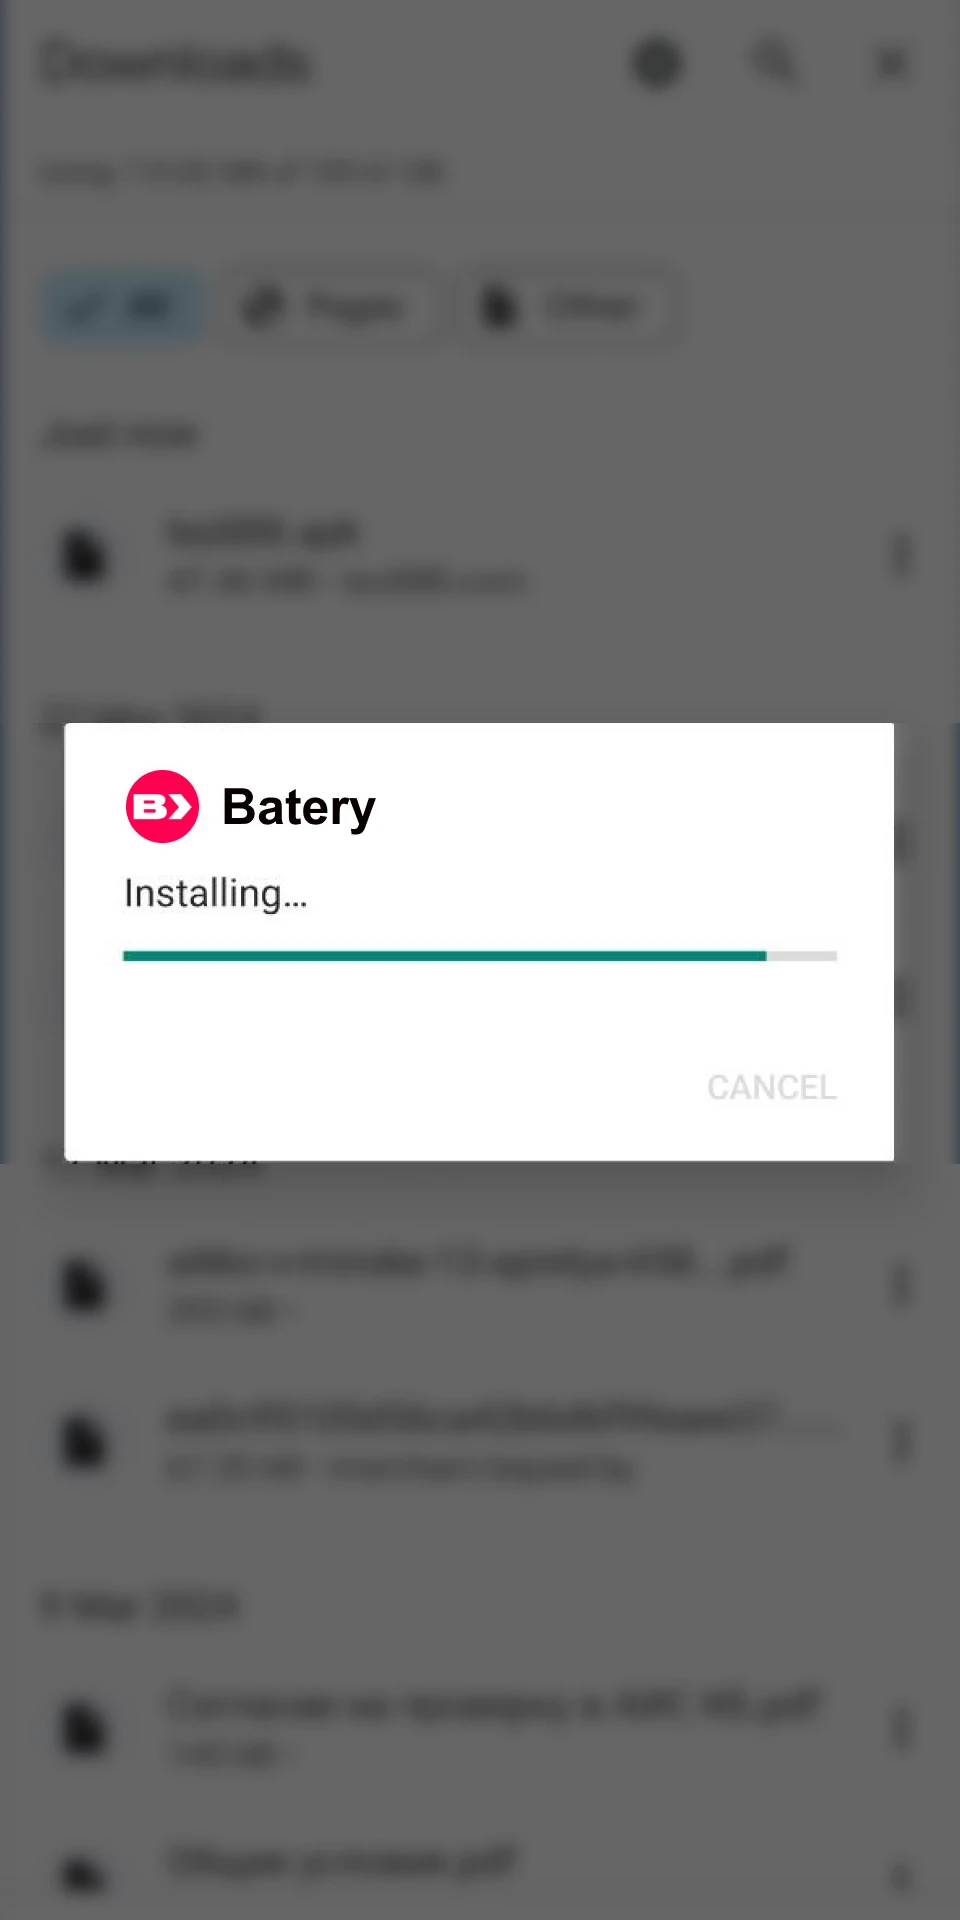 Installing the Batery Android app takes a few seconds.